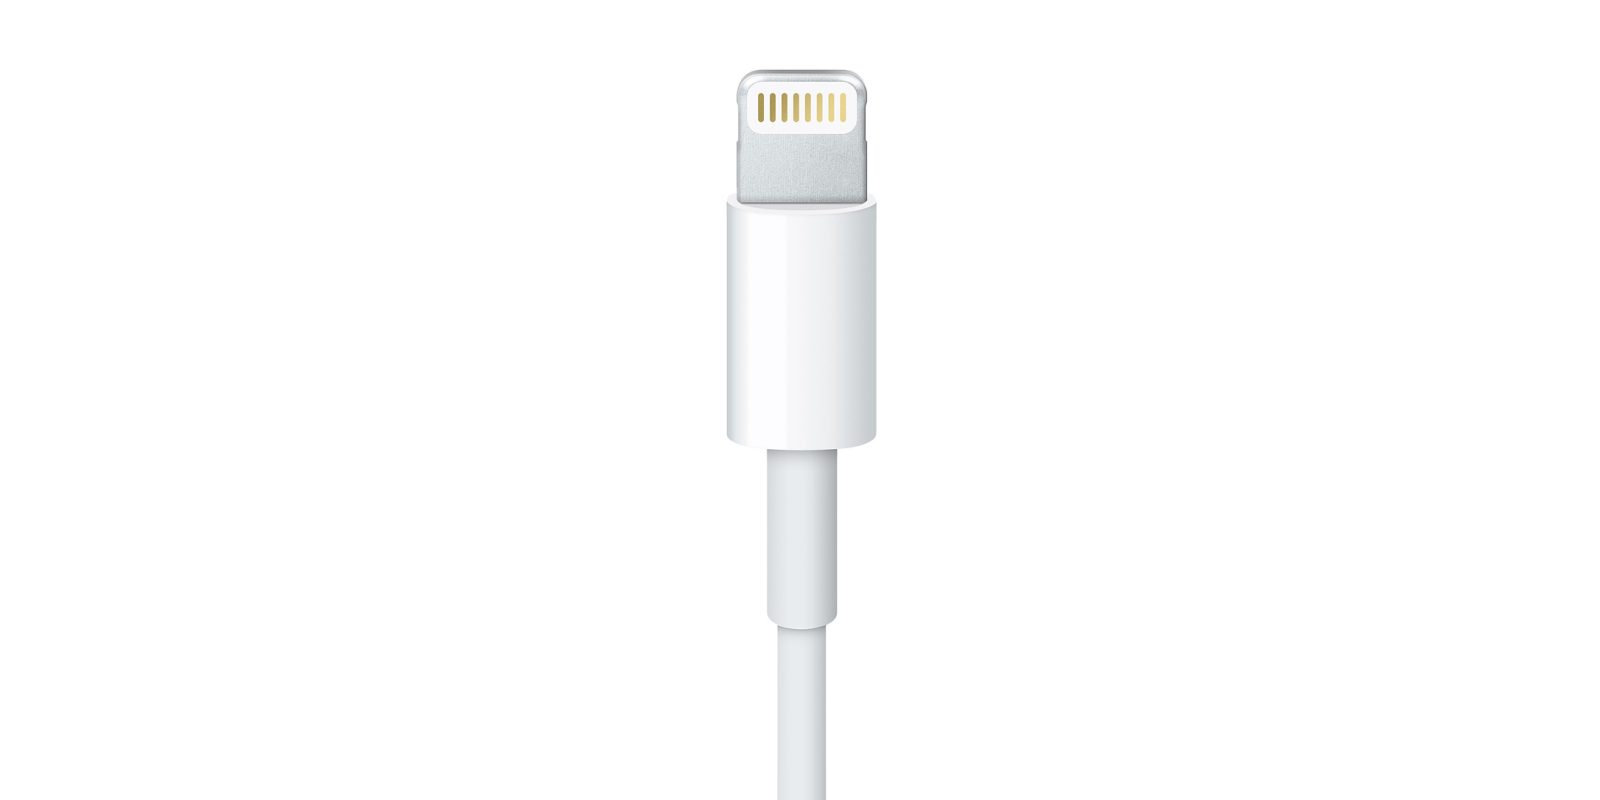 Apple USB-C to Lightning Cable (1m) Foxconn